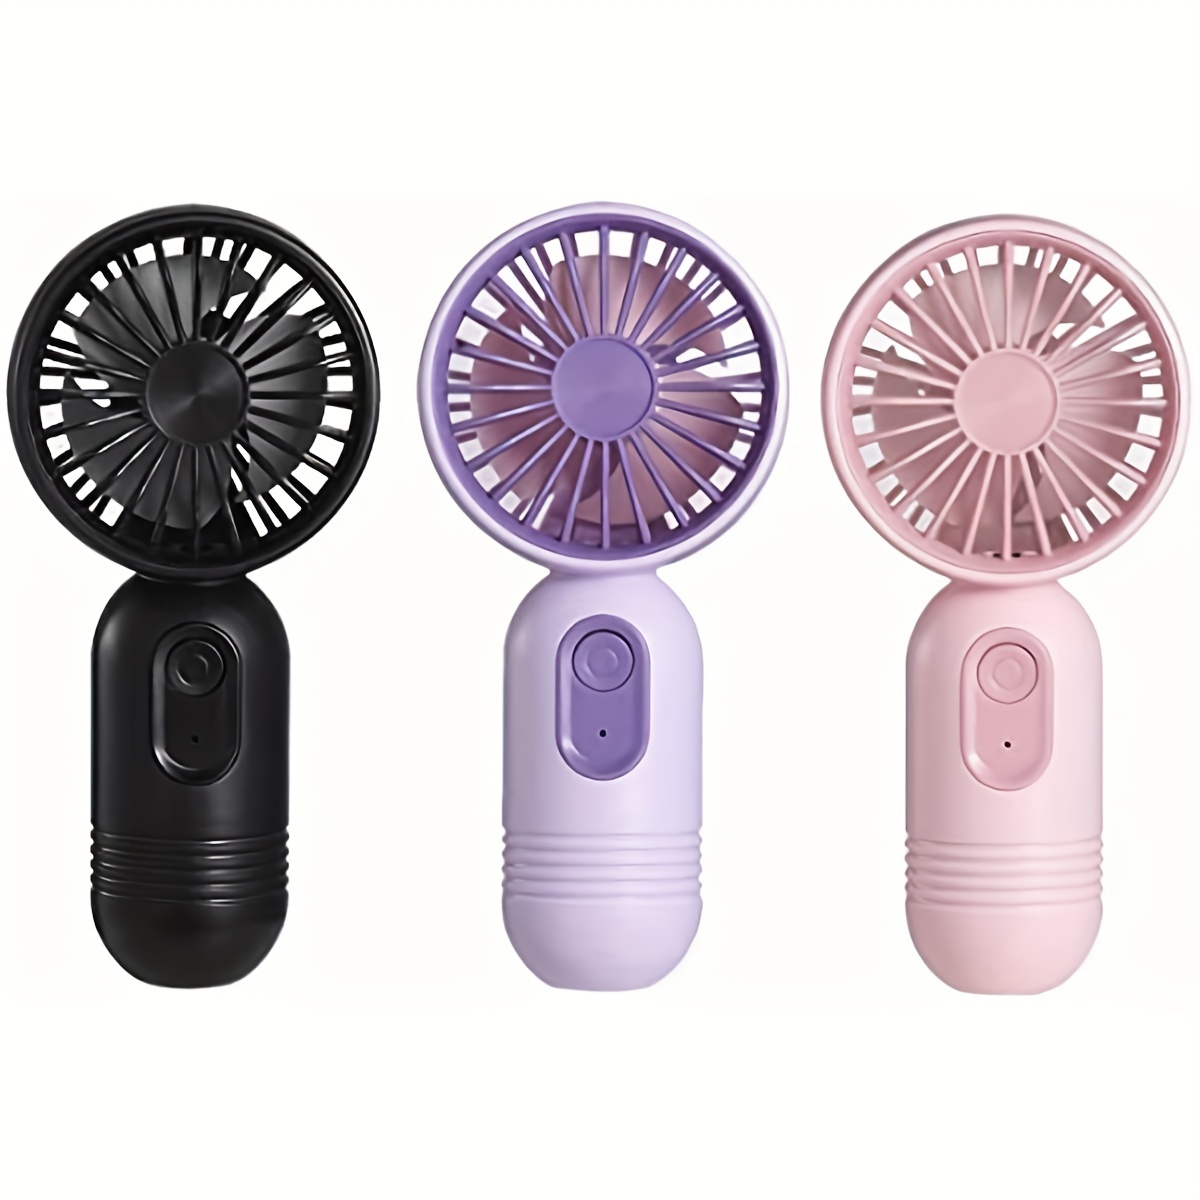 

Usb Rechargeable Mini Portable Fan With 3 Speeds - Lightweight Handheld Fan - Perfect For Office, Outdoor, Travel, And Camping - Keep Cool Anywhere!